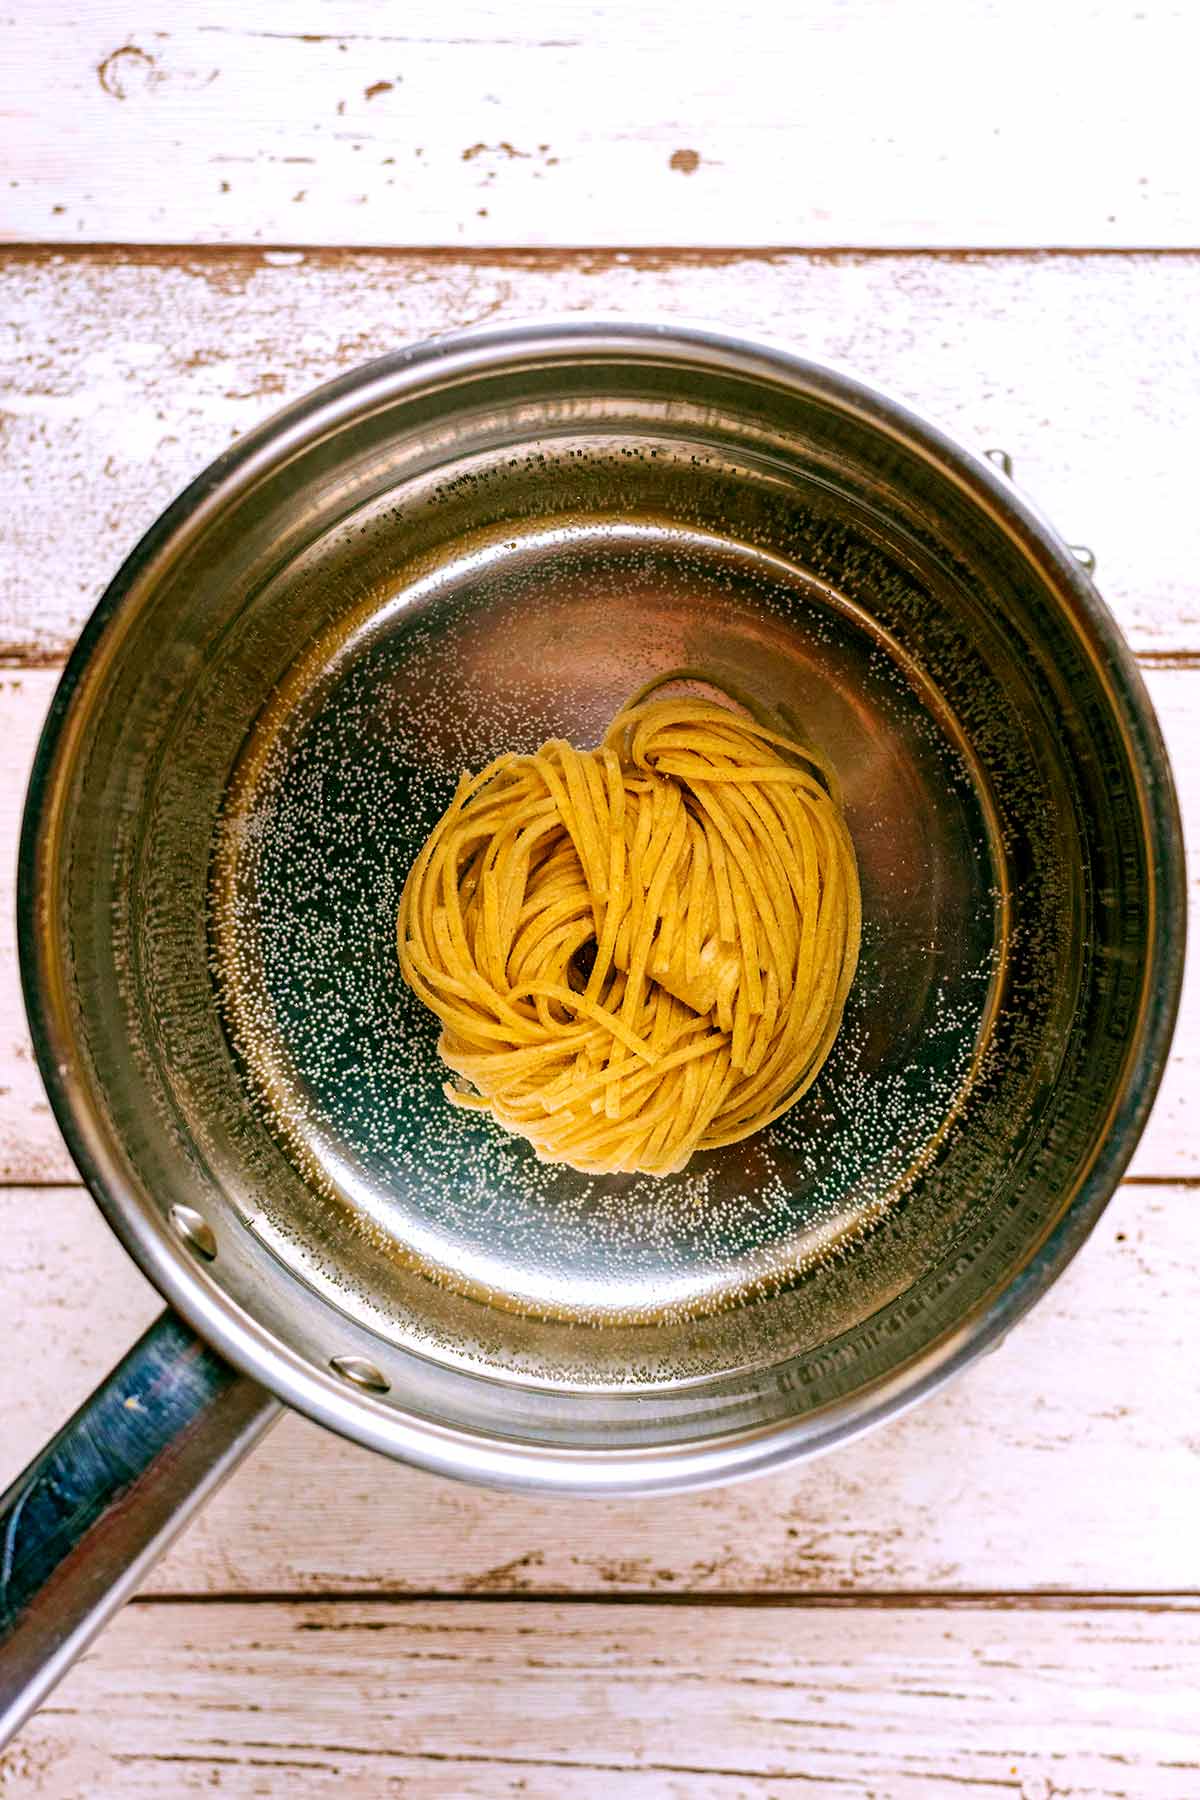 A saucepan full of water and a nest of noodles.